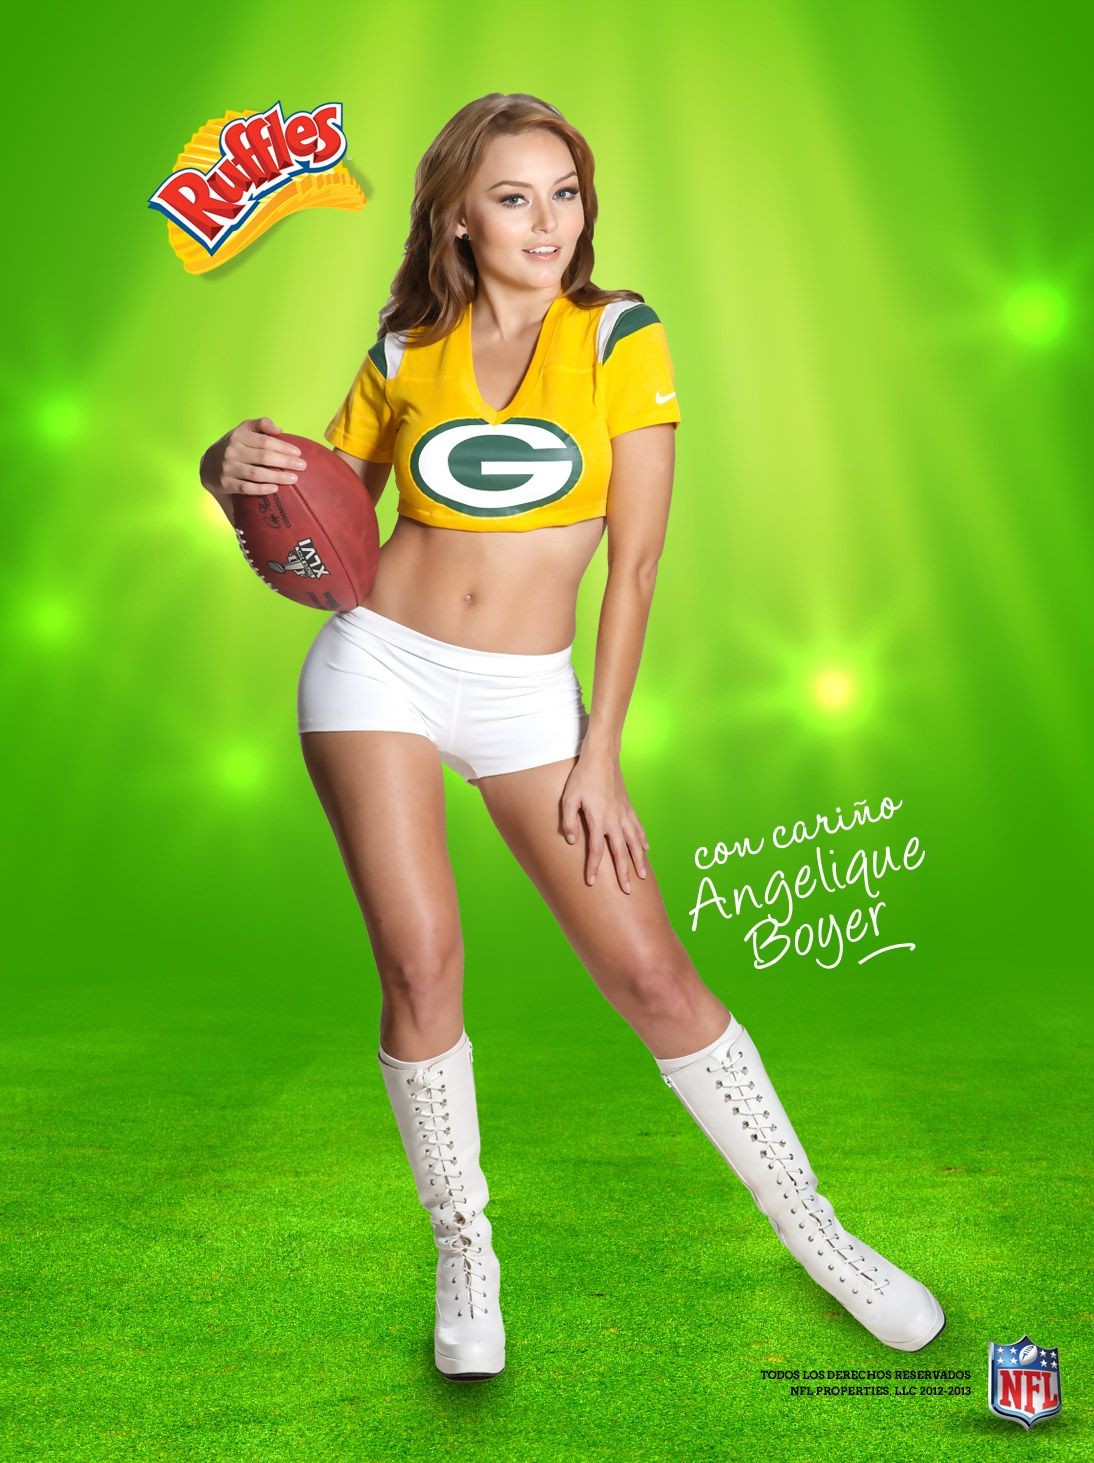 Angelique Boyer wearing sexy jersey look-alike outfits in NFL promos #75243013